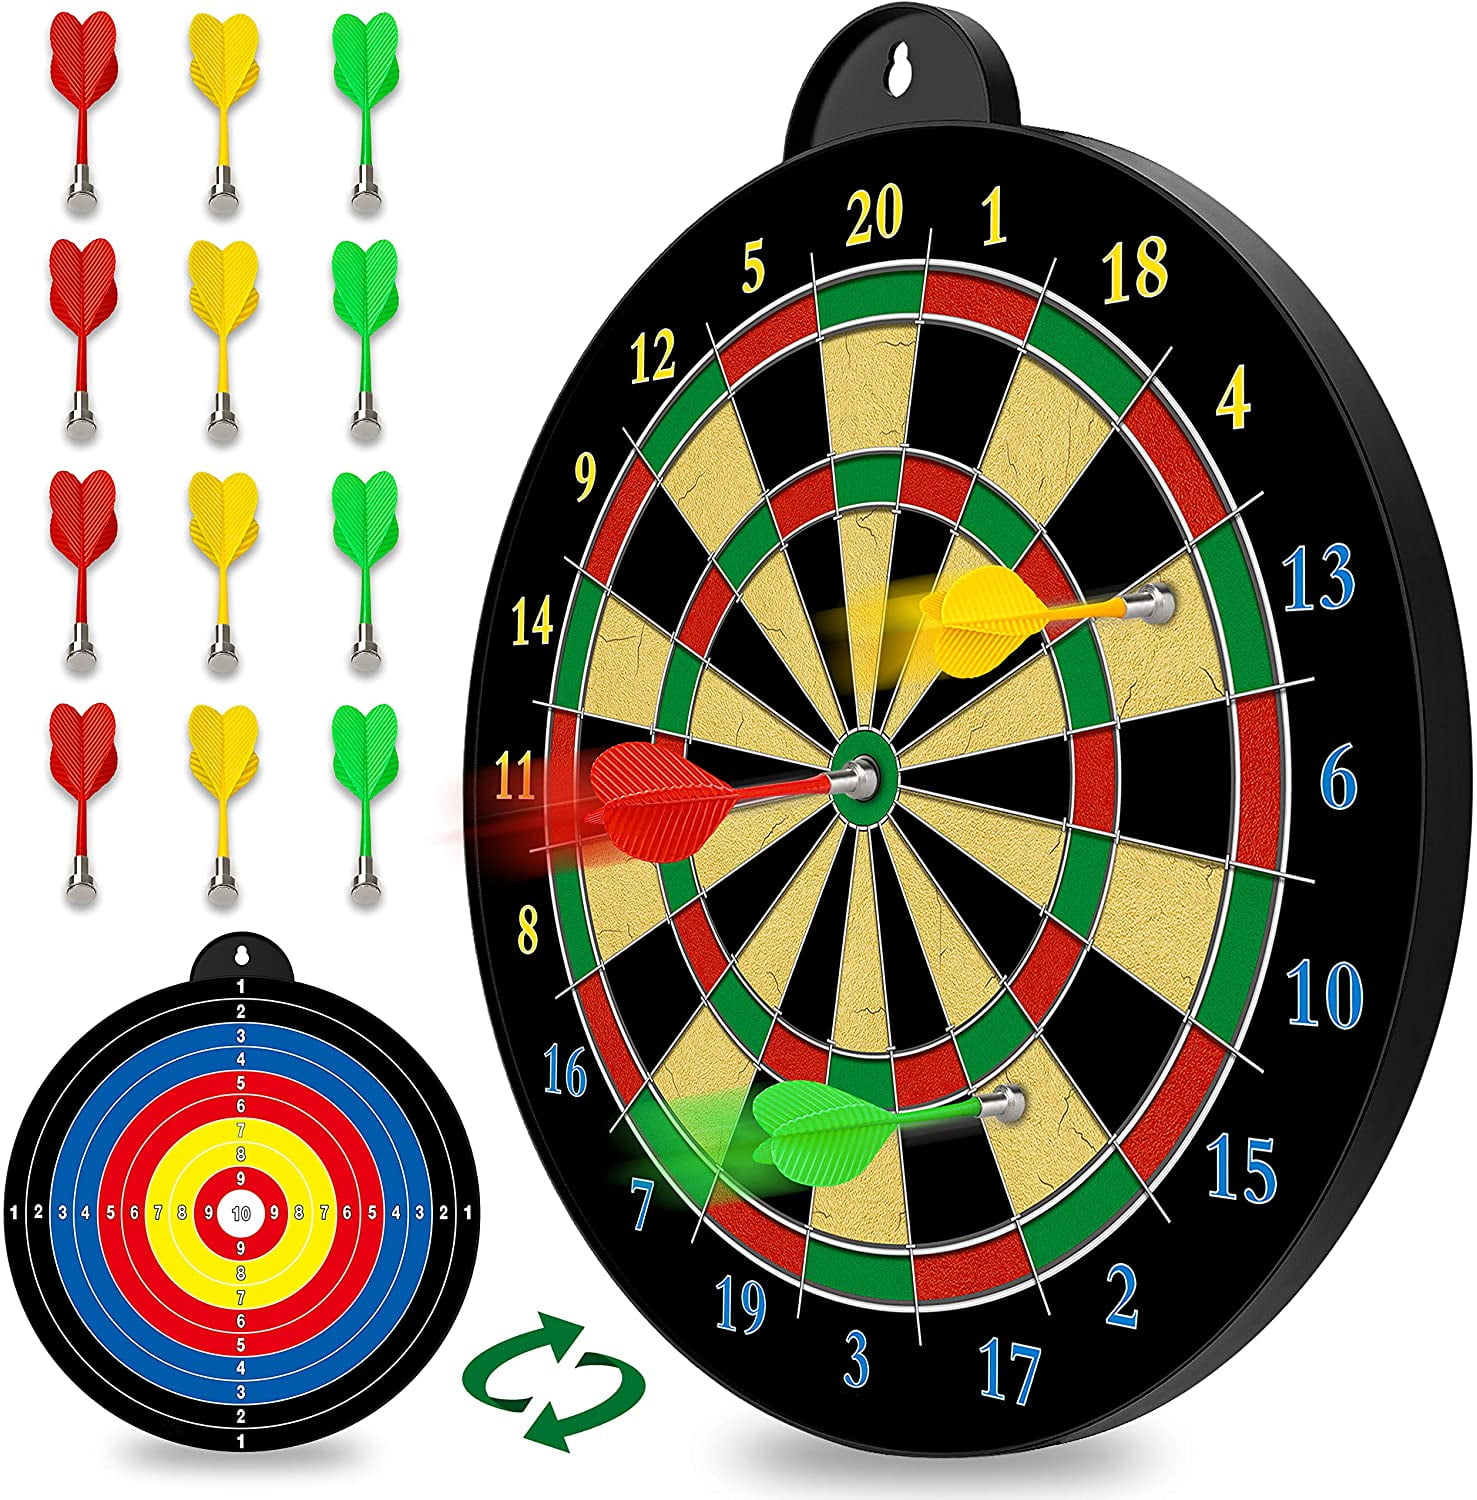 Cuku Magnetic Dart Board - 12pcs Magnetic Darts (Red Green Yellow) - Excellent Indoor Game and Party Games - Magnetic Dart Board Toys